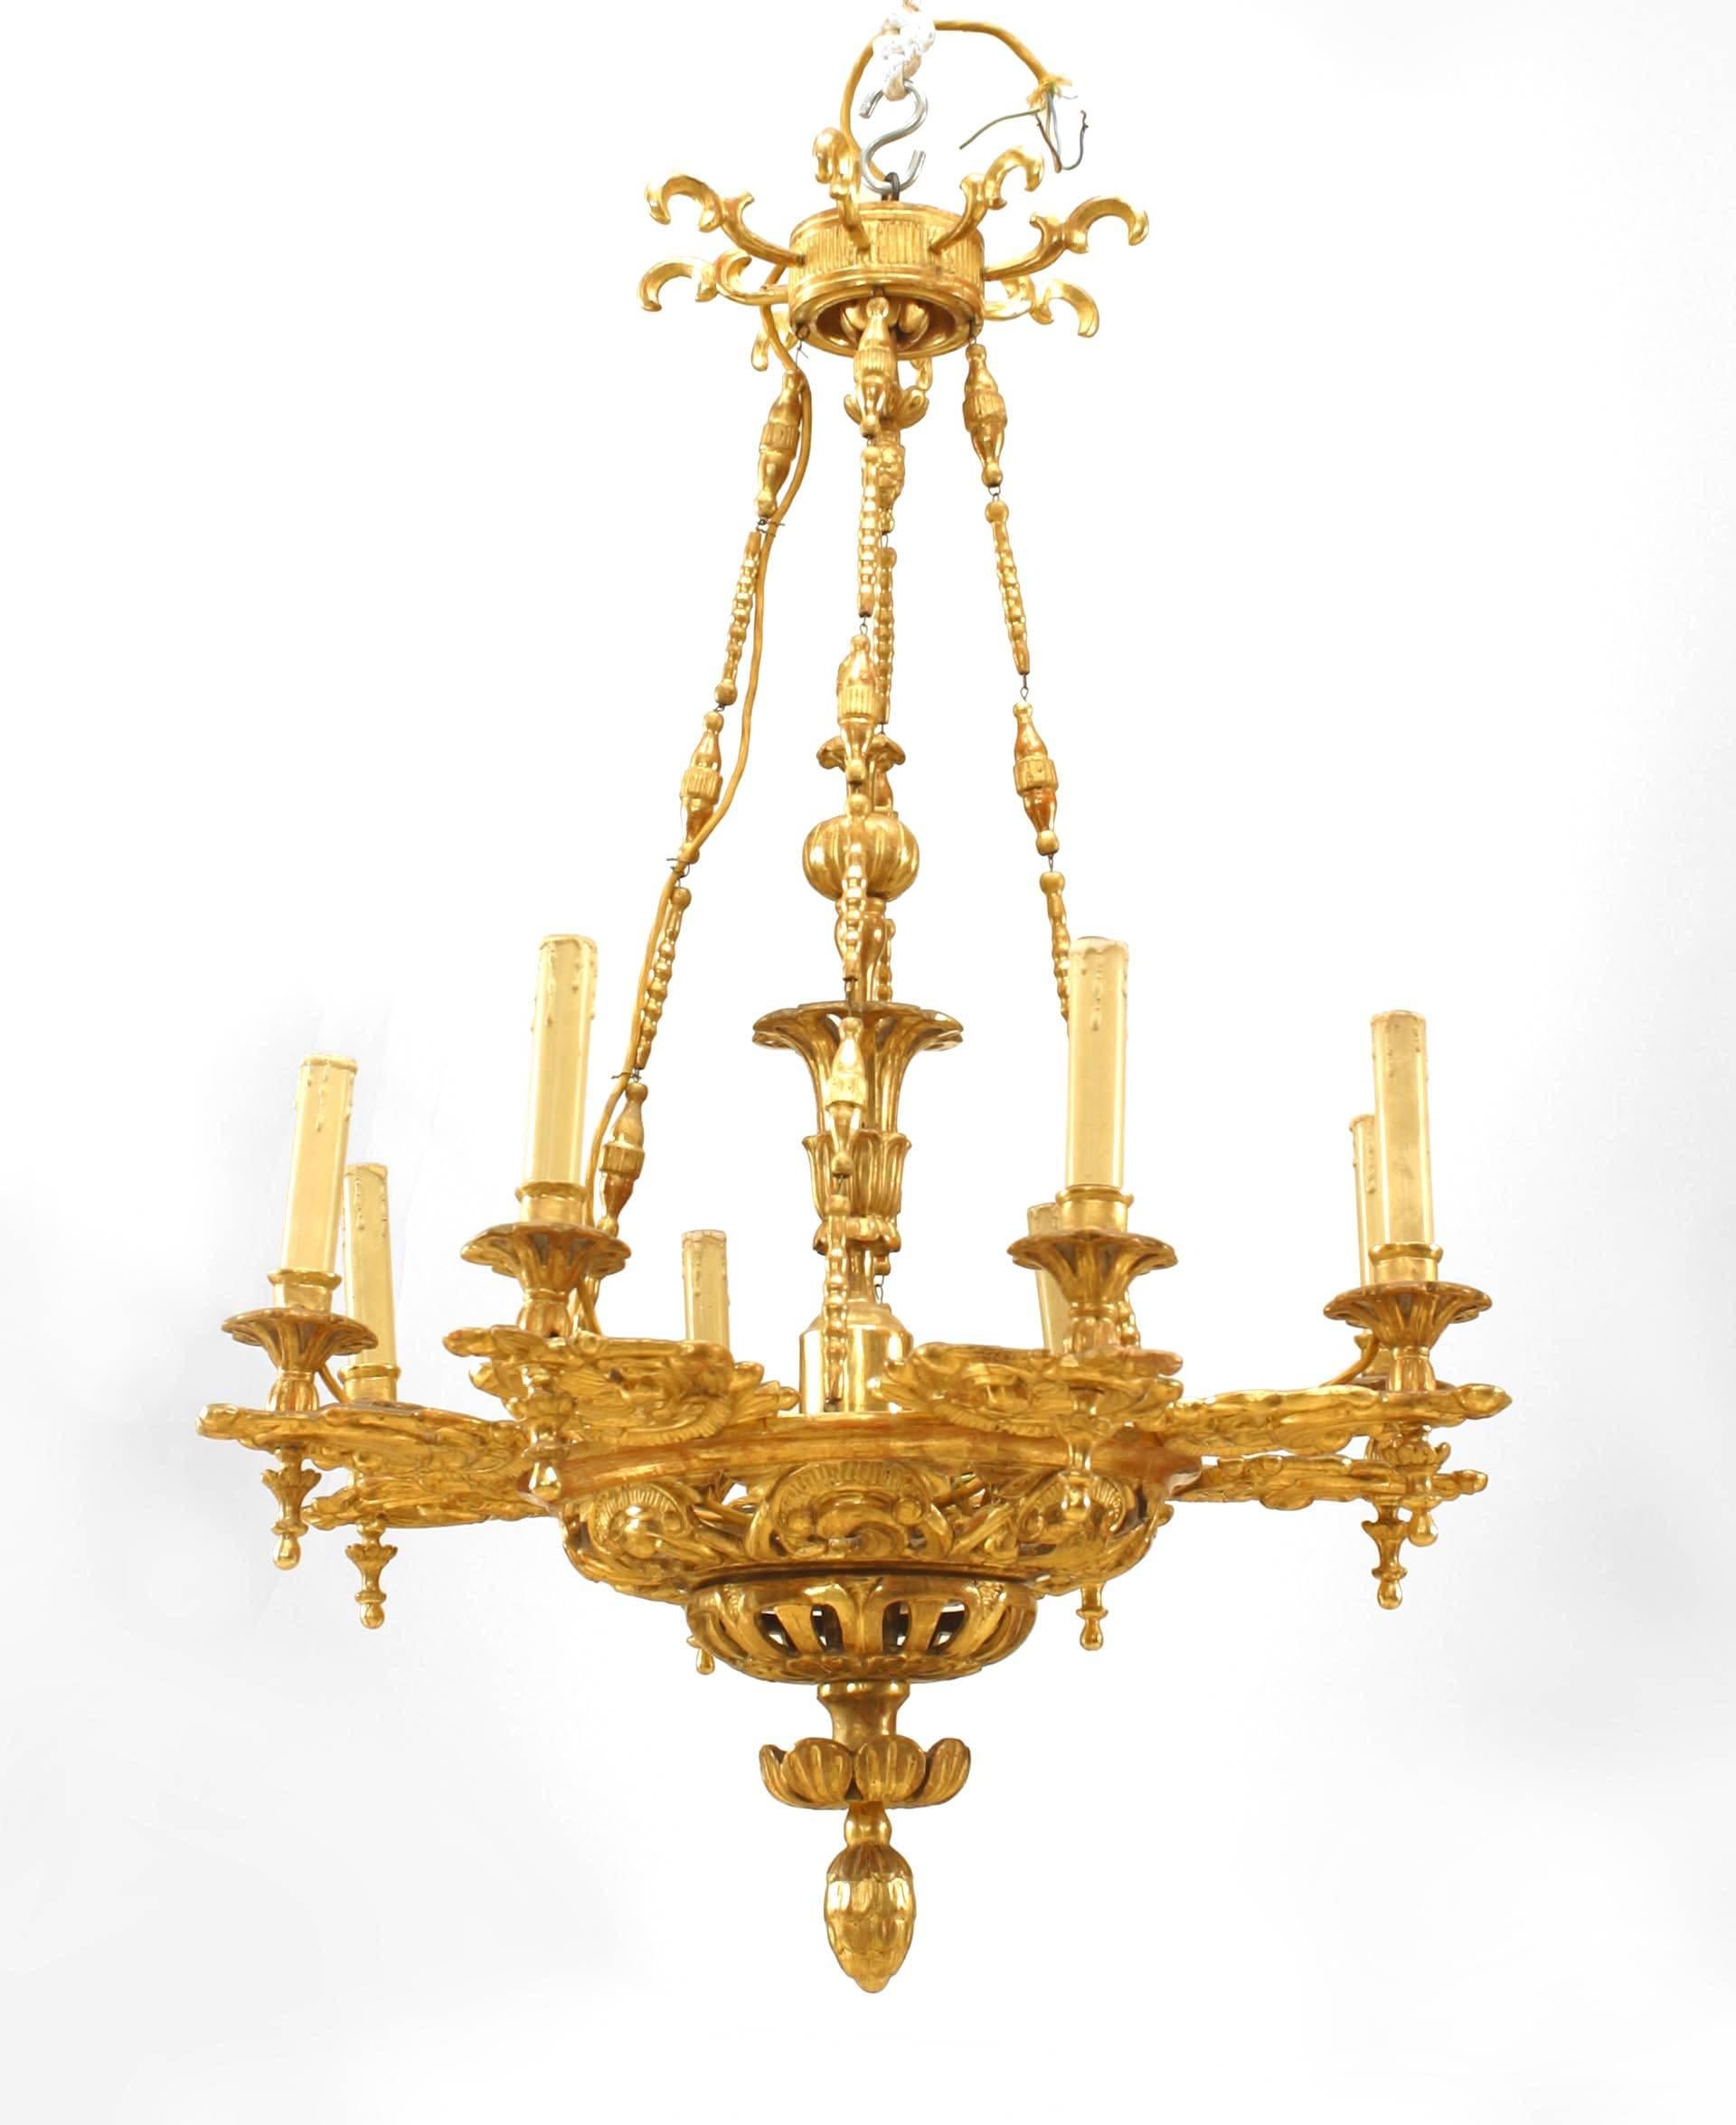 Austrian Biedermeier (Circa 1930) gilt carved chandelier with 8 filigree carved arms & bottom with finial and 8 scroll carvings on canopy
